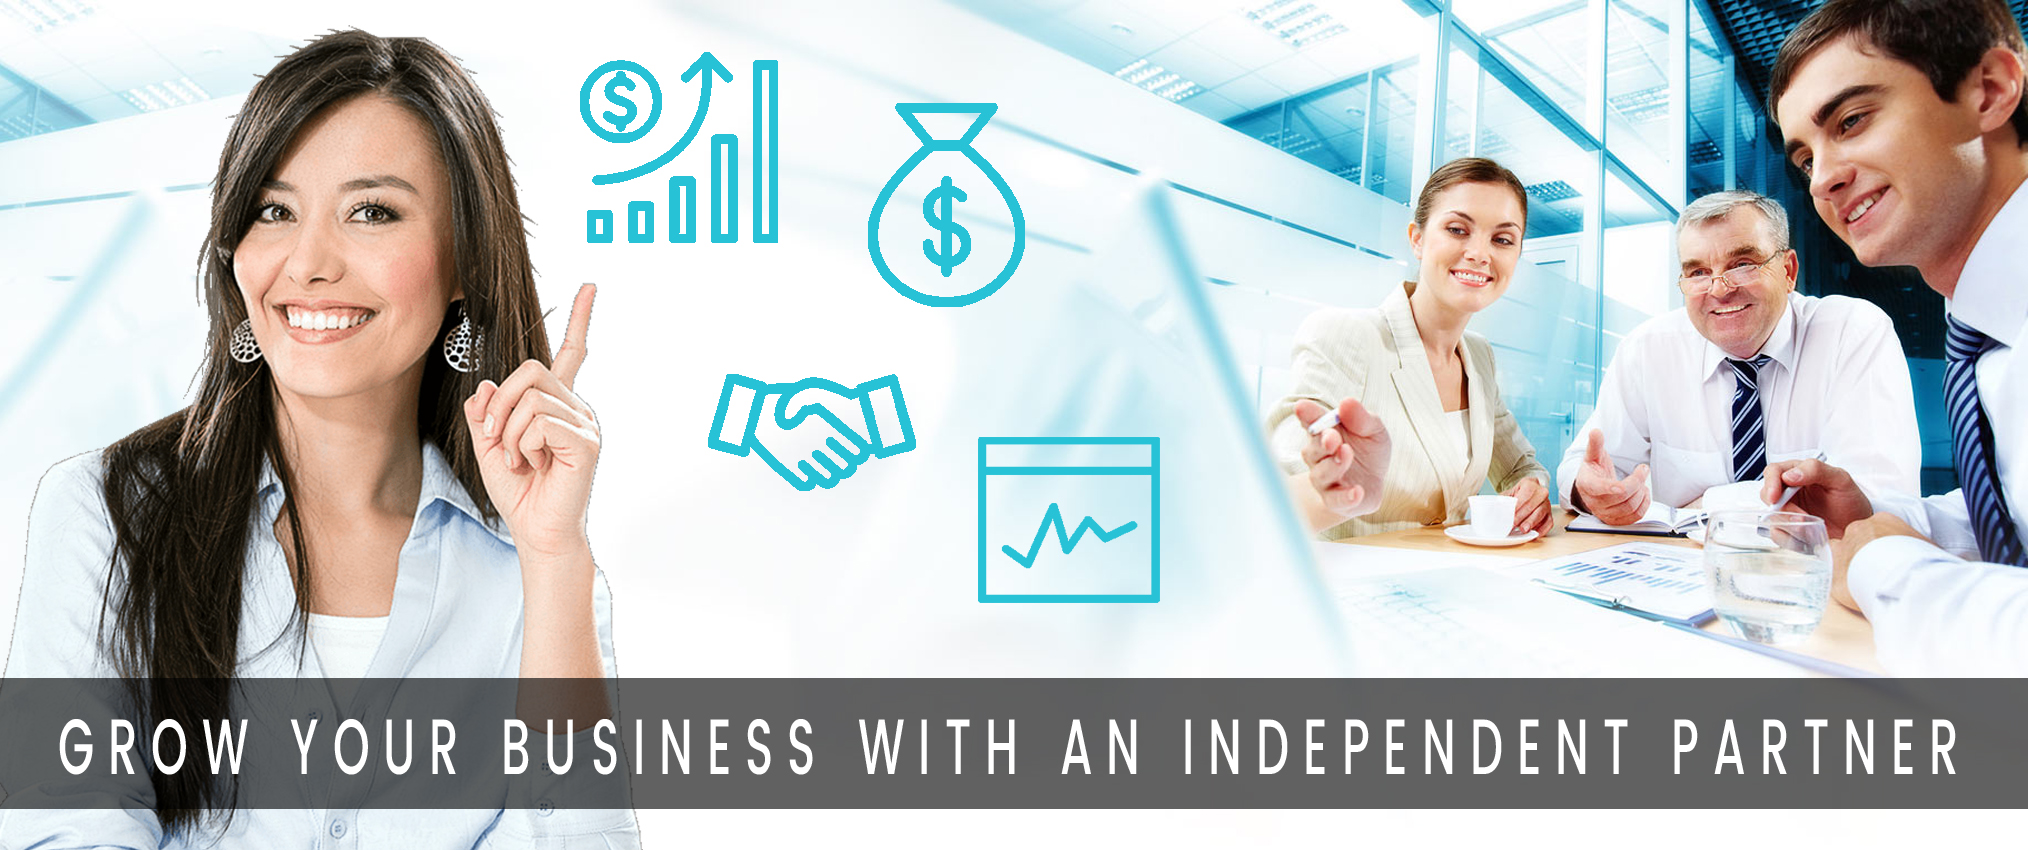 Grow Your Business with an Independent Partner